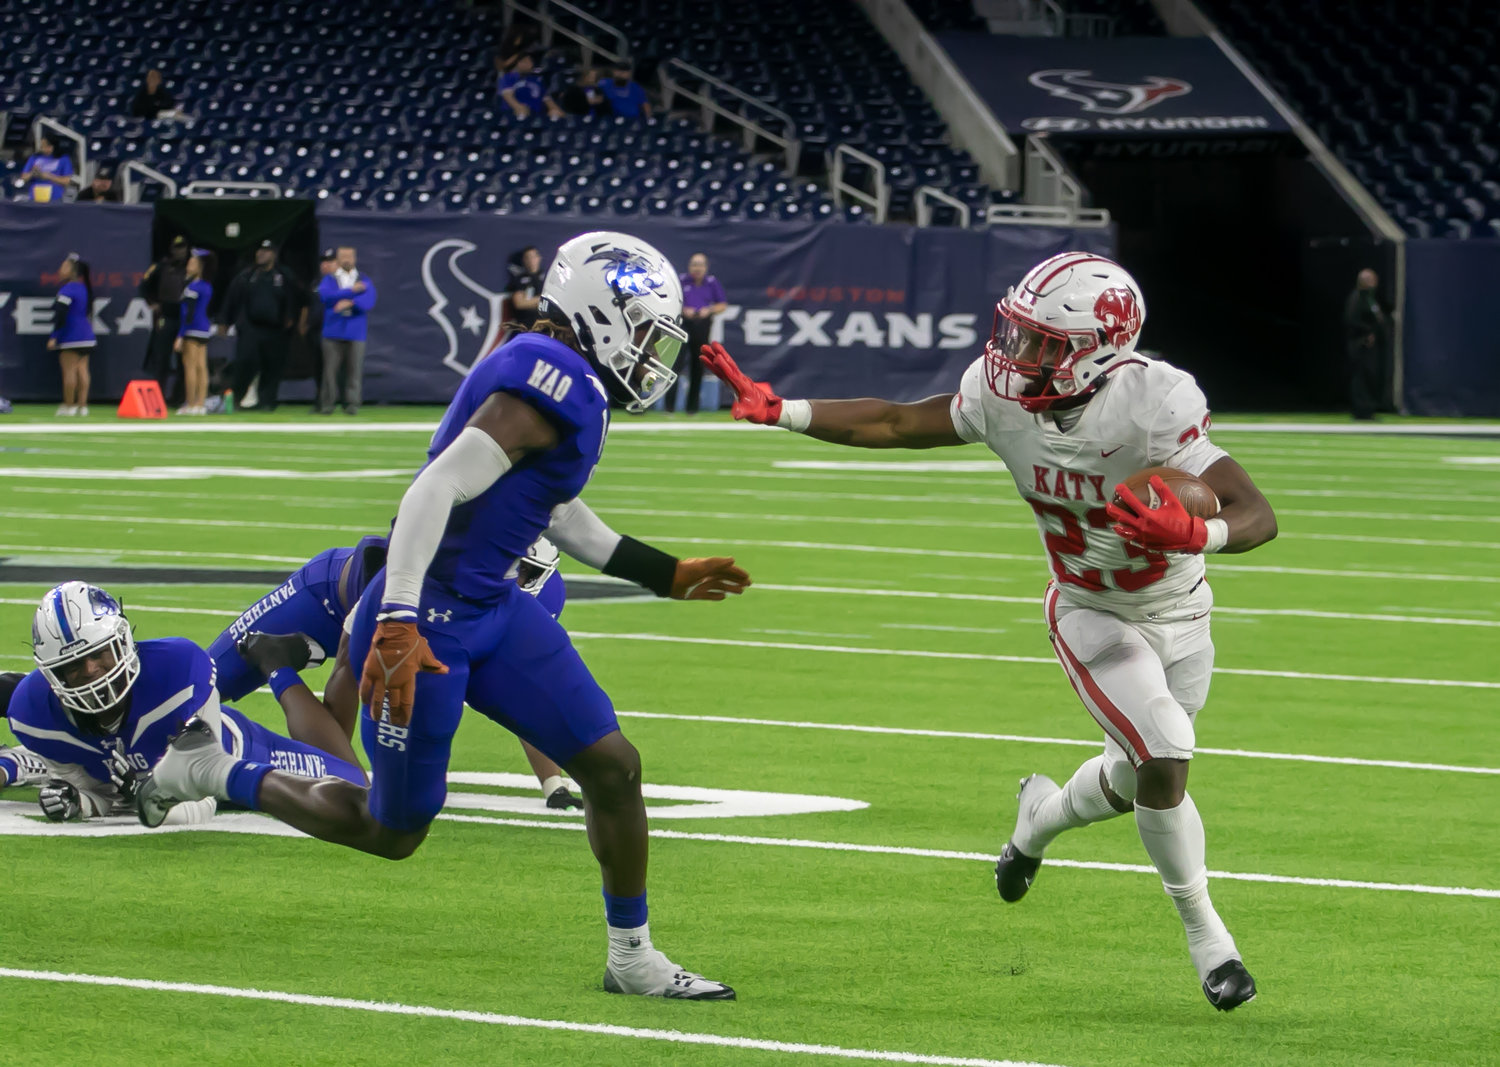 Seth Davis stiff-arms a defender during Friday's Class 6A-Division II Region III Final between Katy and C.E. King at NRG Stadium.